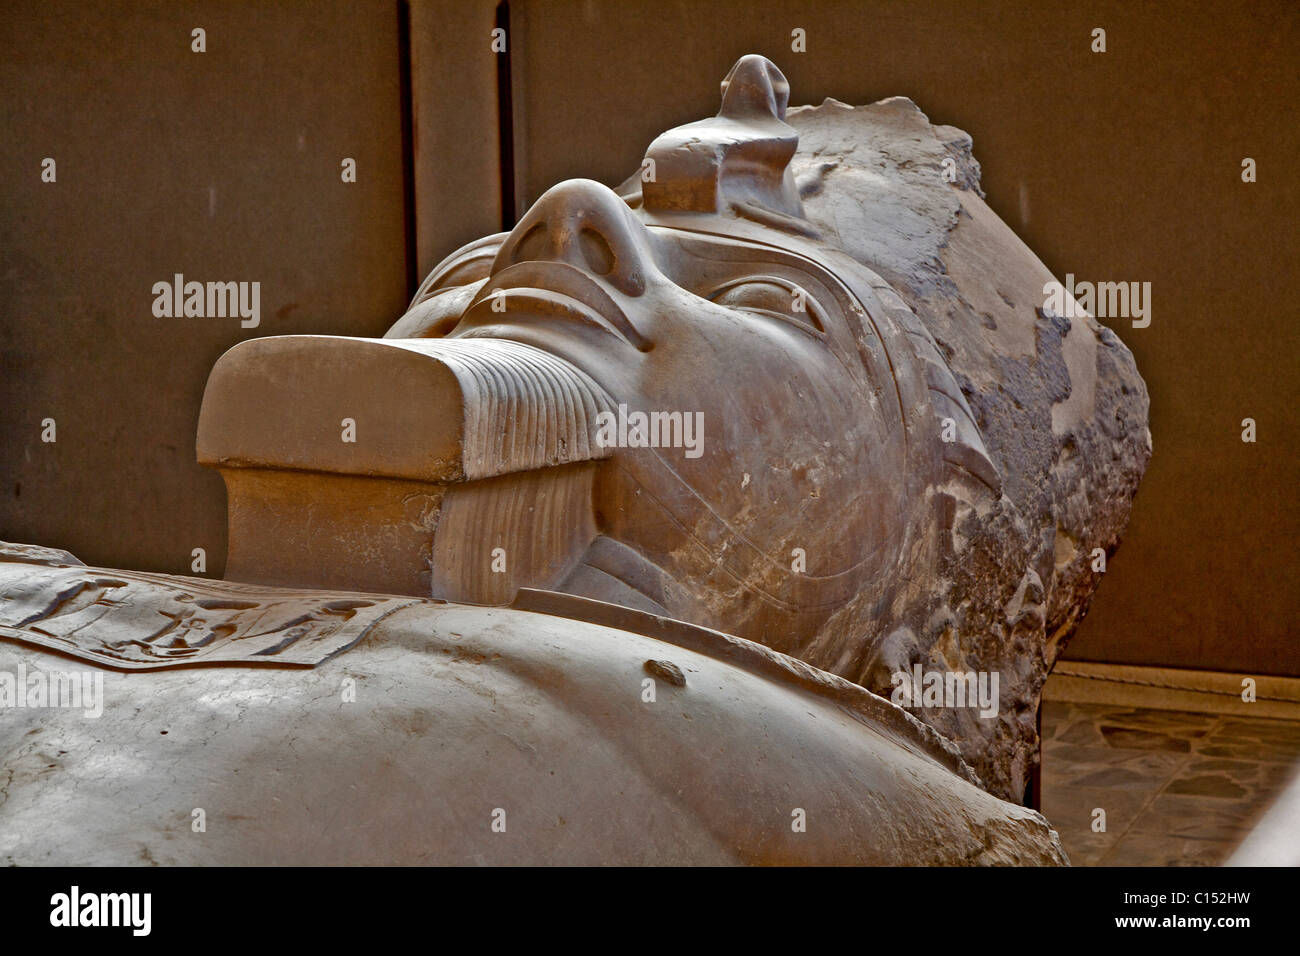 Pharaoh Ramses II remains stone cold and very still in the recline position in Memphis, Egypt Stock Photo